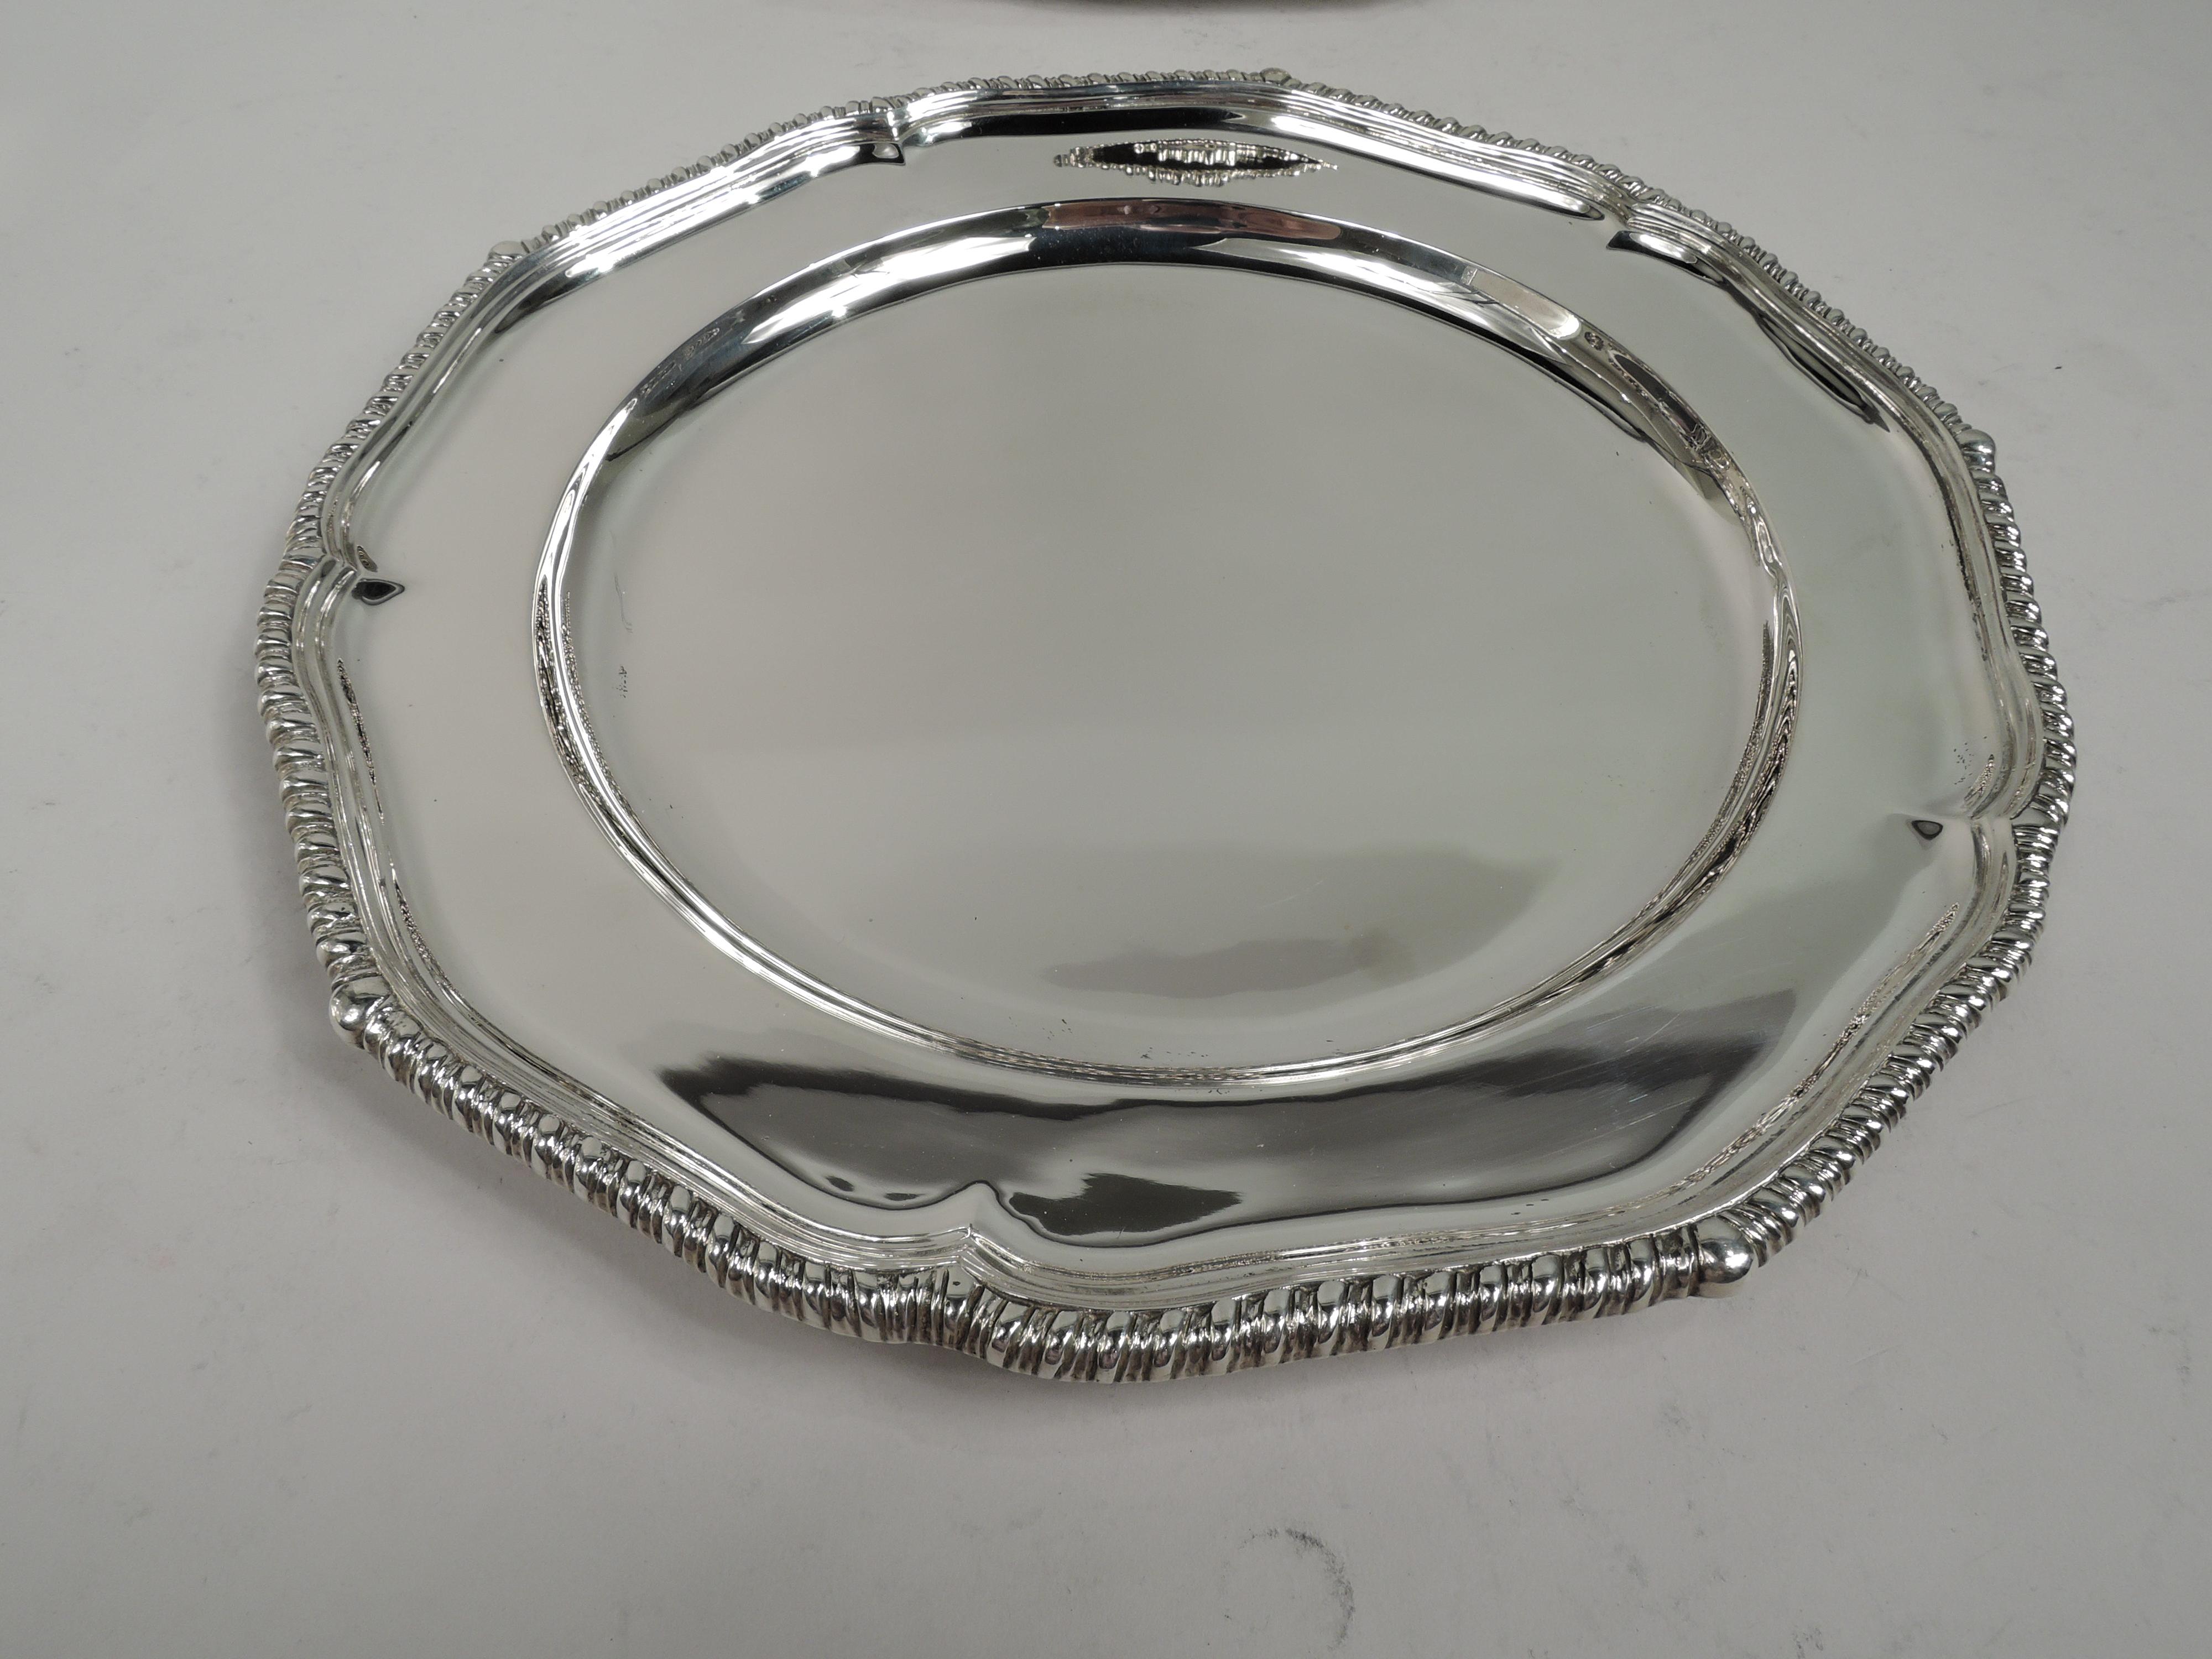 American Set of 12 Old-Fashioned Georgian-Style Sterling Silver Dinner Plates